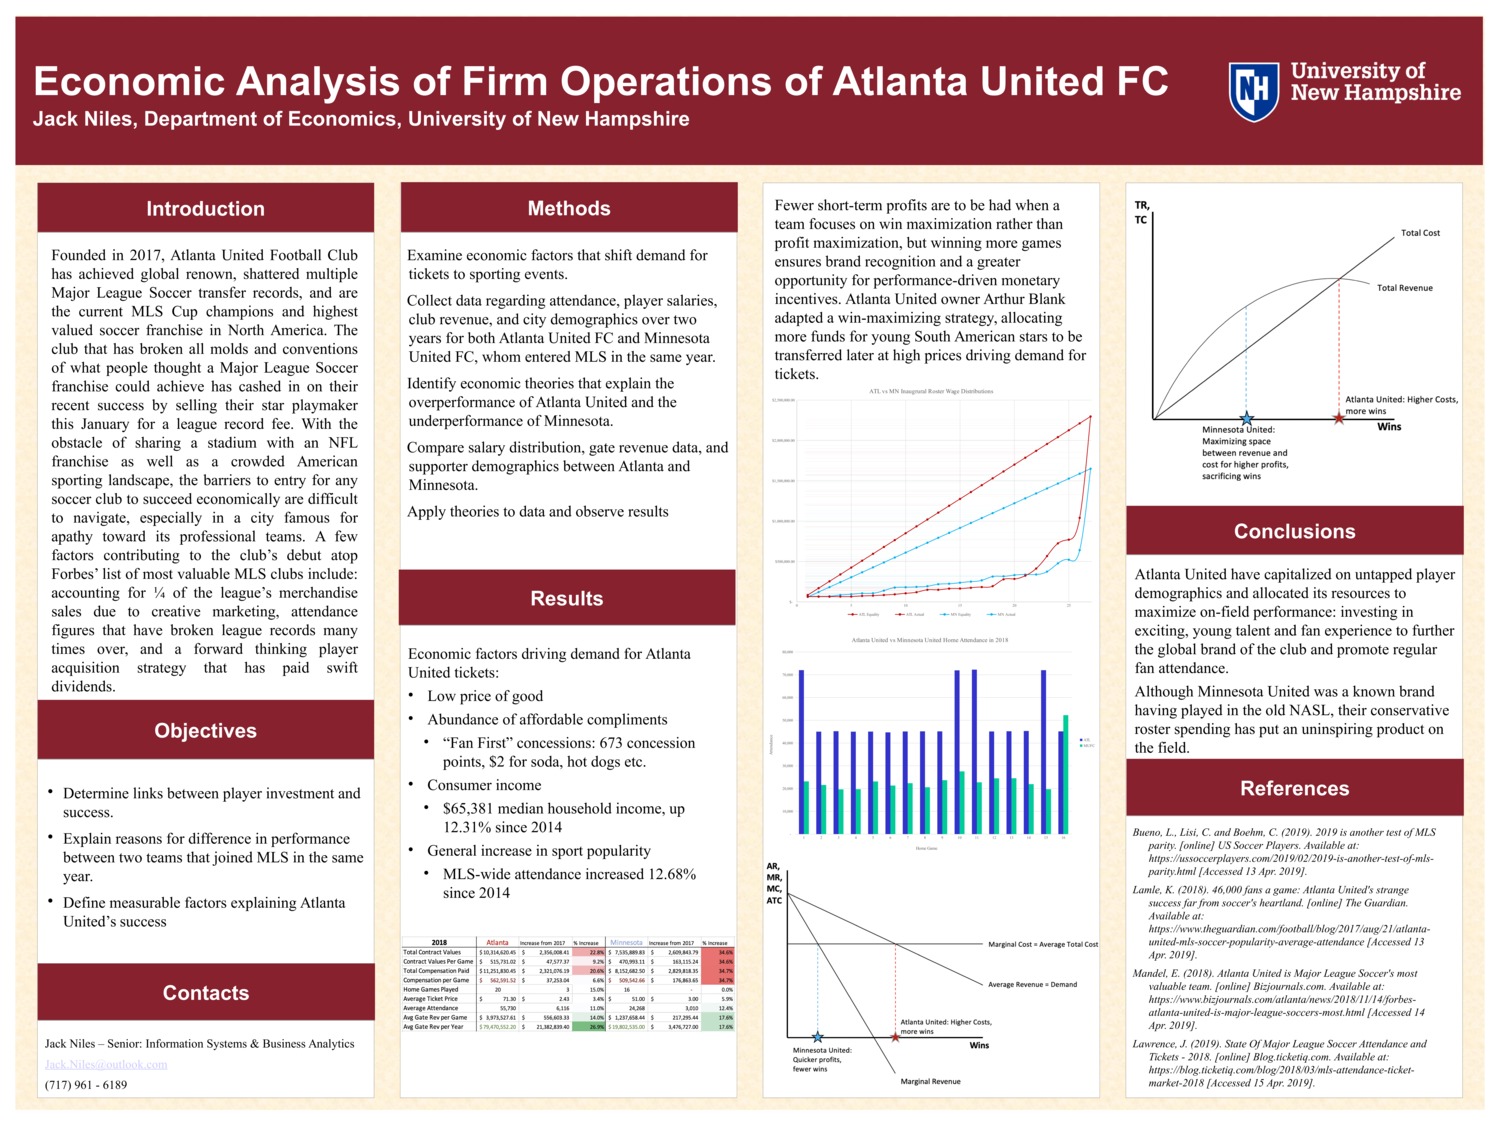 Economic Analysis Of Firm Operations Of Atlanta United Fc by jcn1001